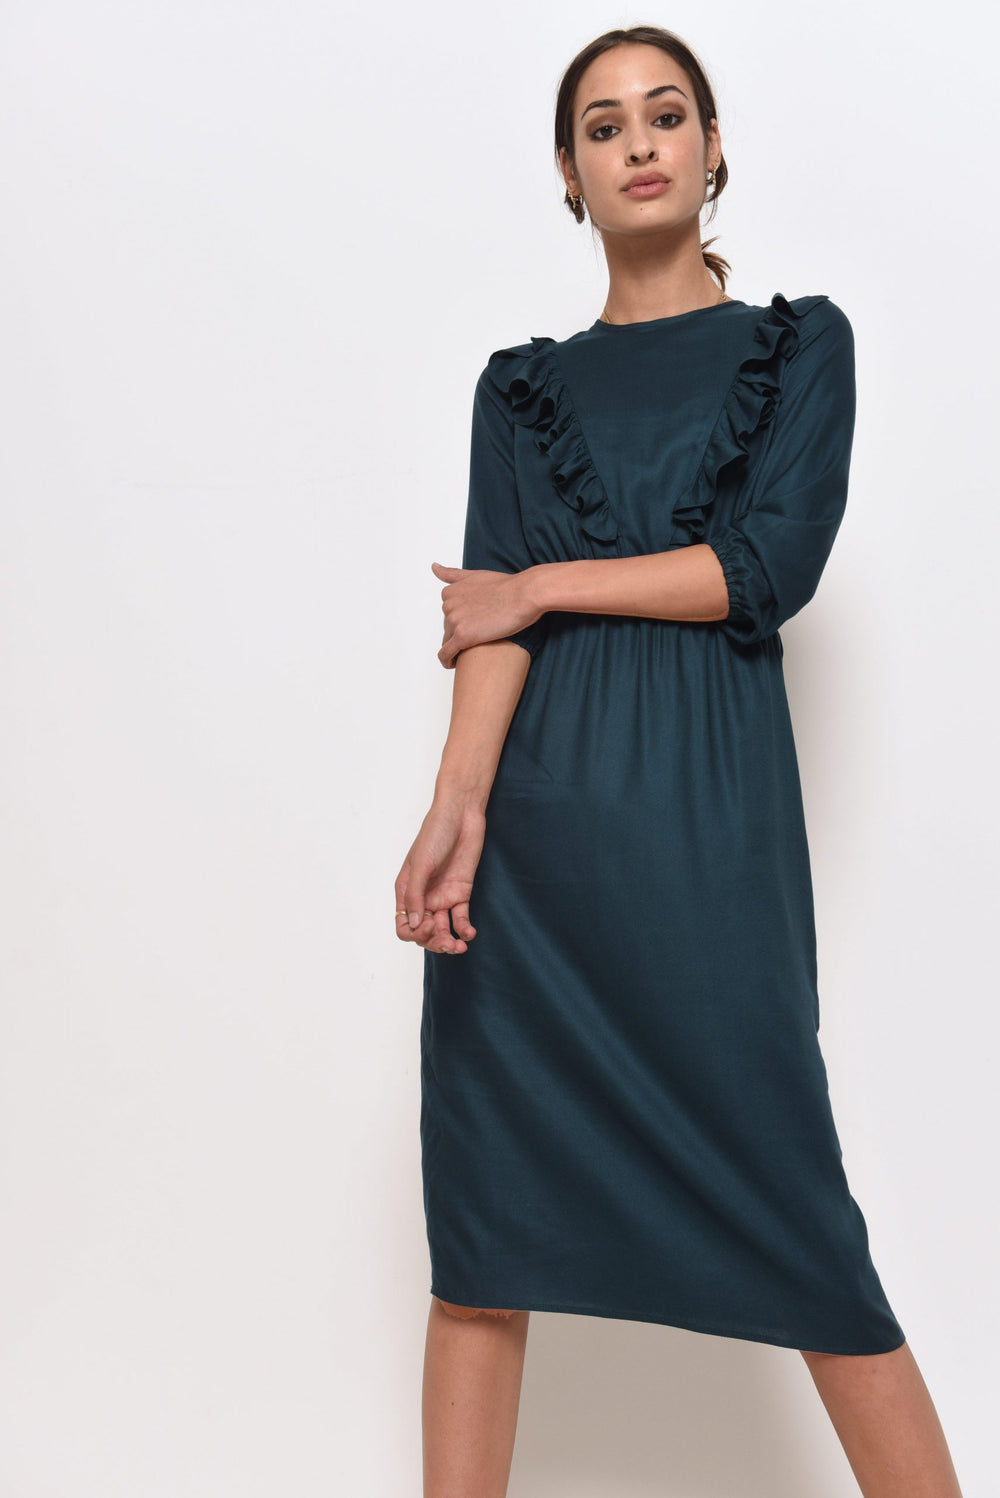 Woman wearing the Rosie Dress sewing pattern from Fibre Mood on The Fold Line. A dress pattern made in viscose, crepe or chiffon fabrics, featuring a round neckline, front bodice ruffles, elasticated waist, bracelet sleeves with elasticised hems and knee 